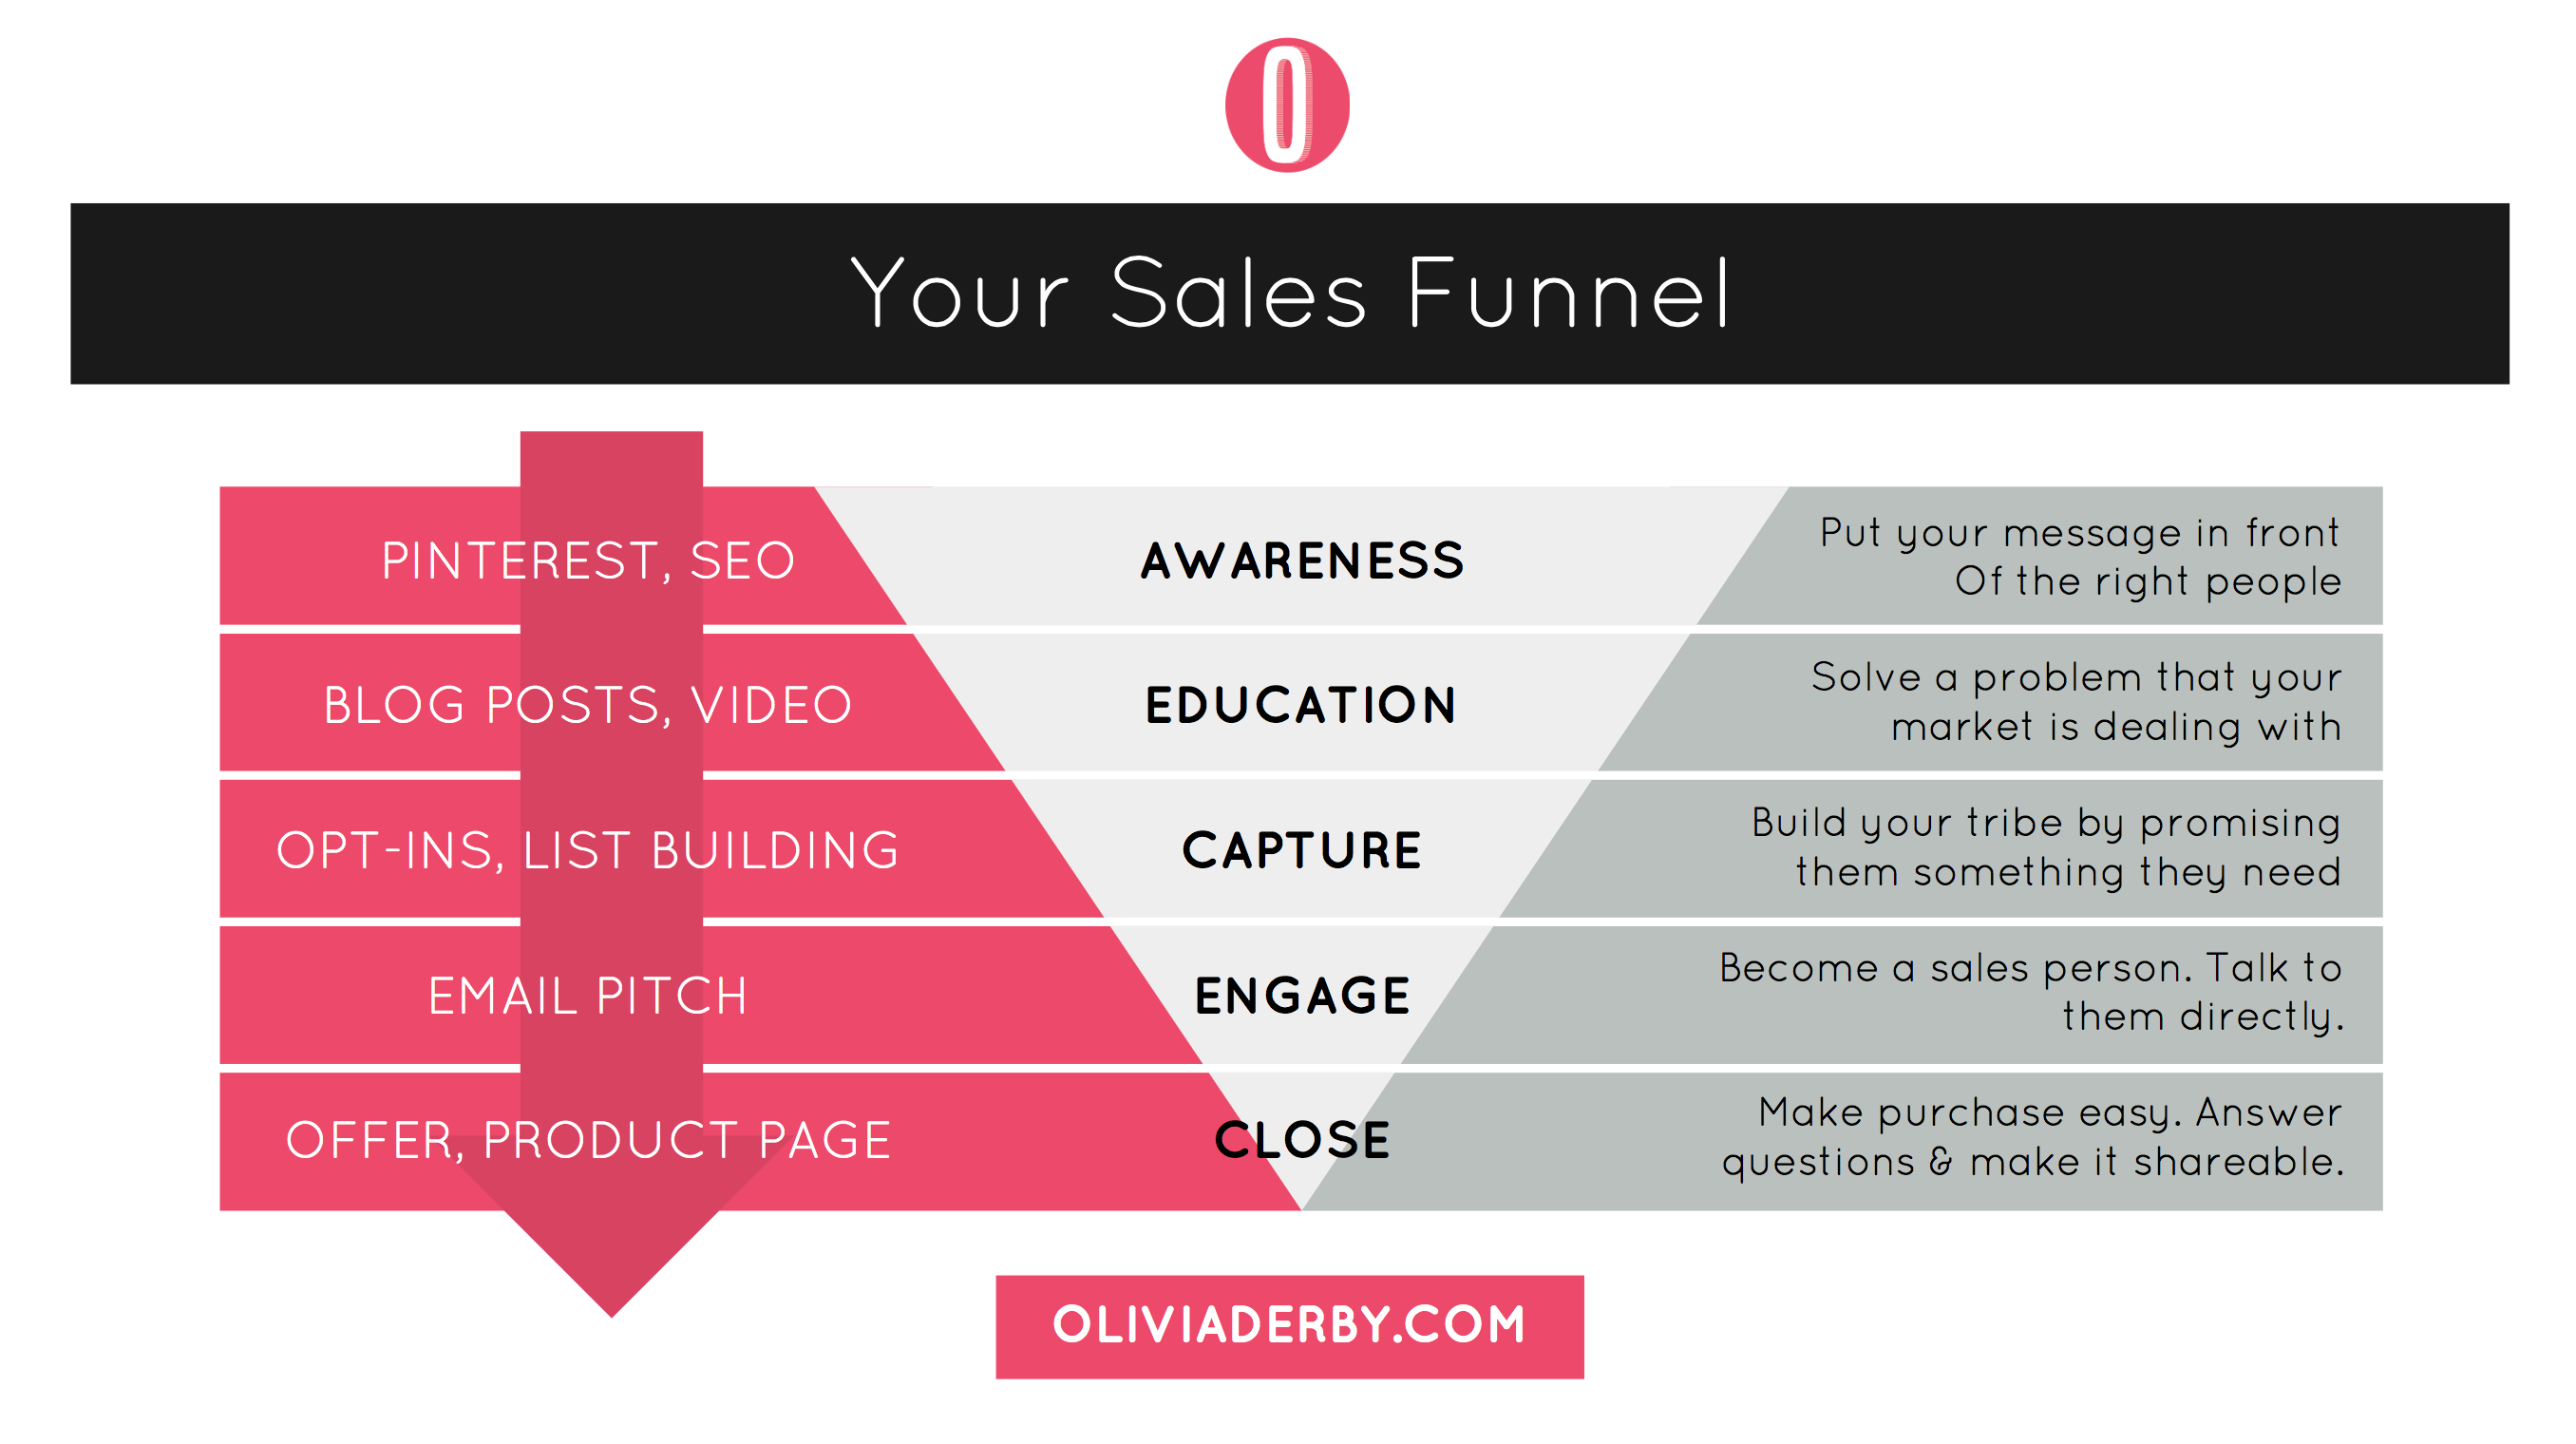 Your Sales Funnel